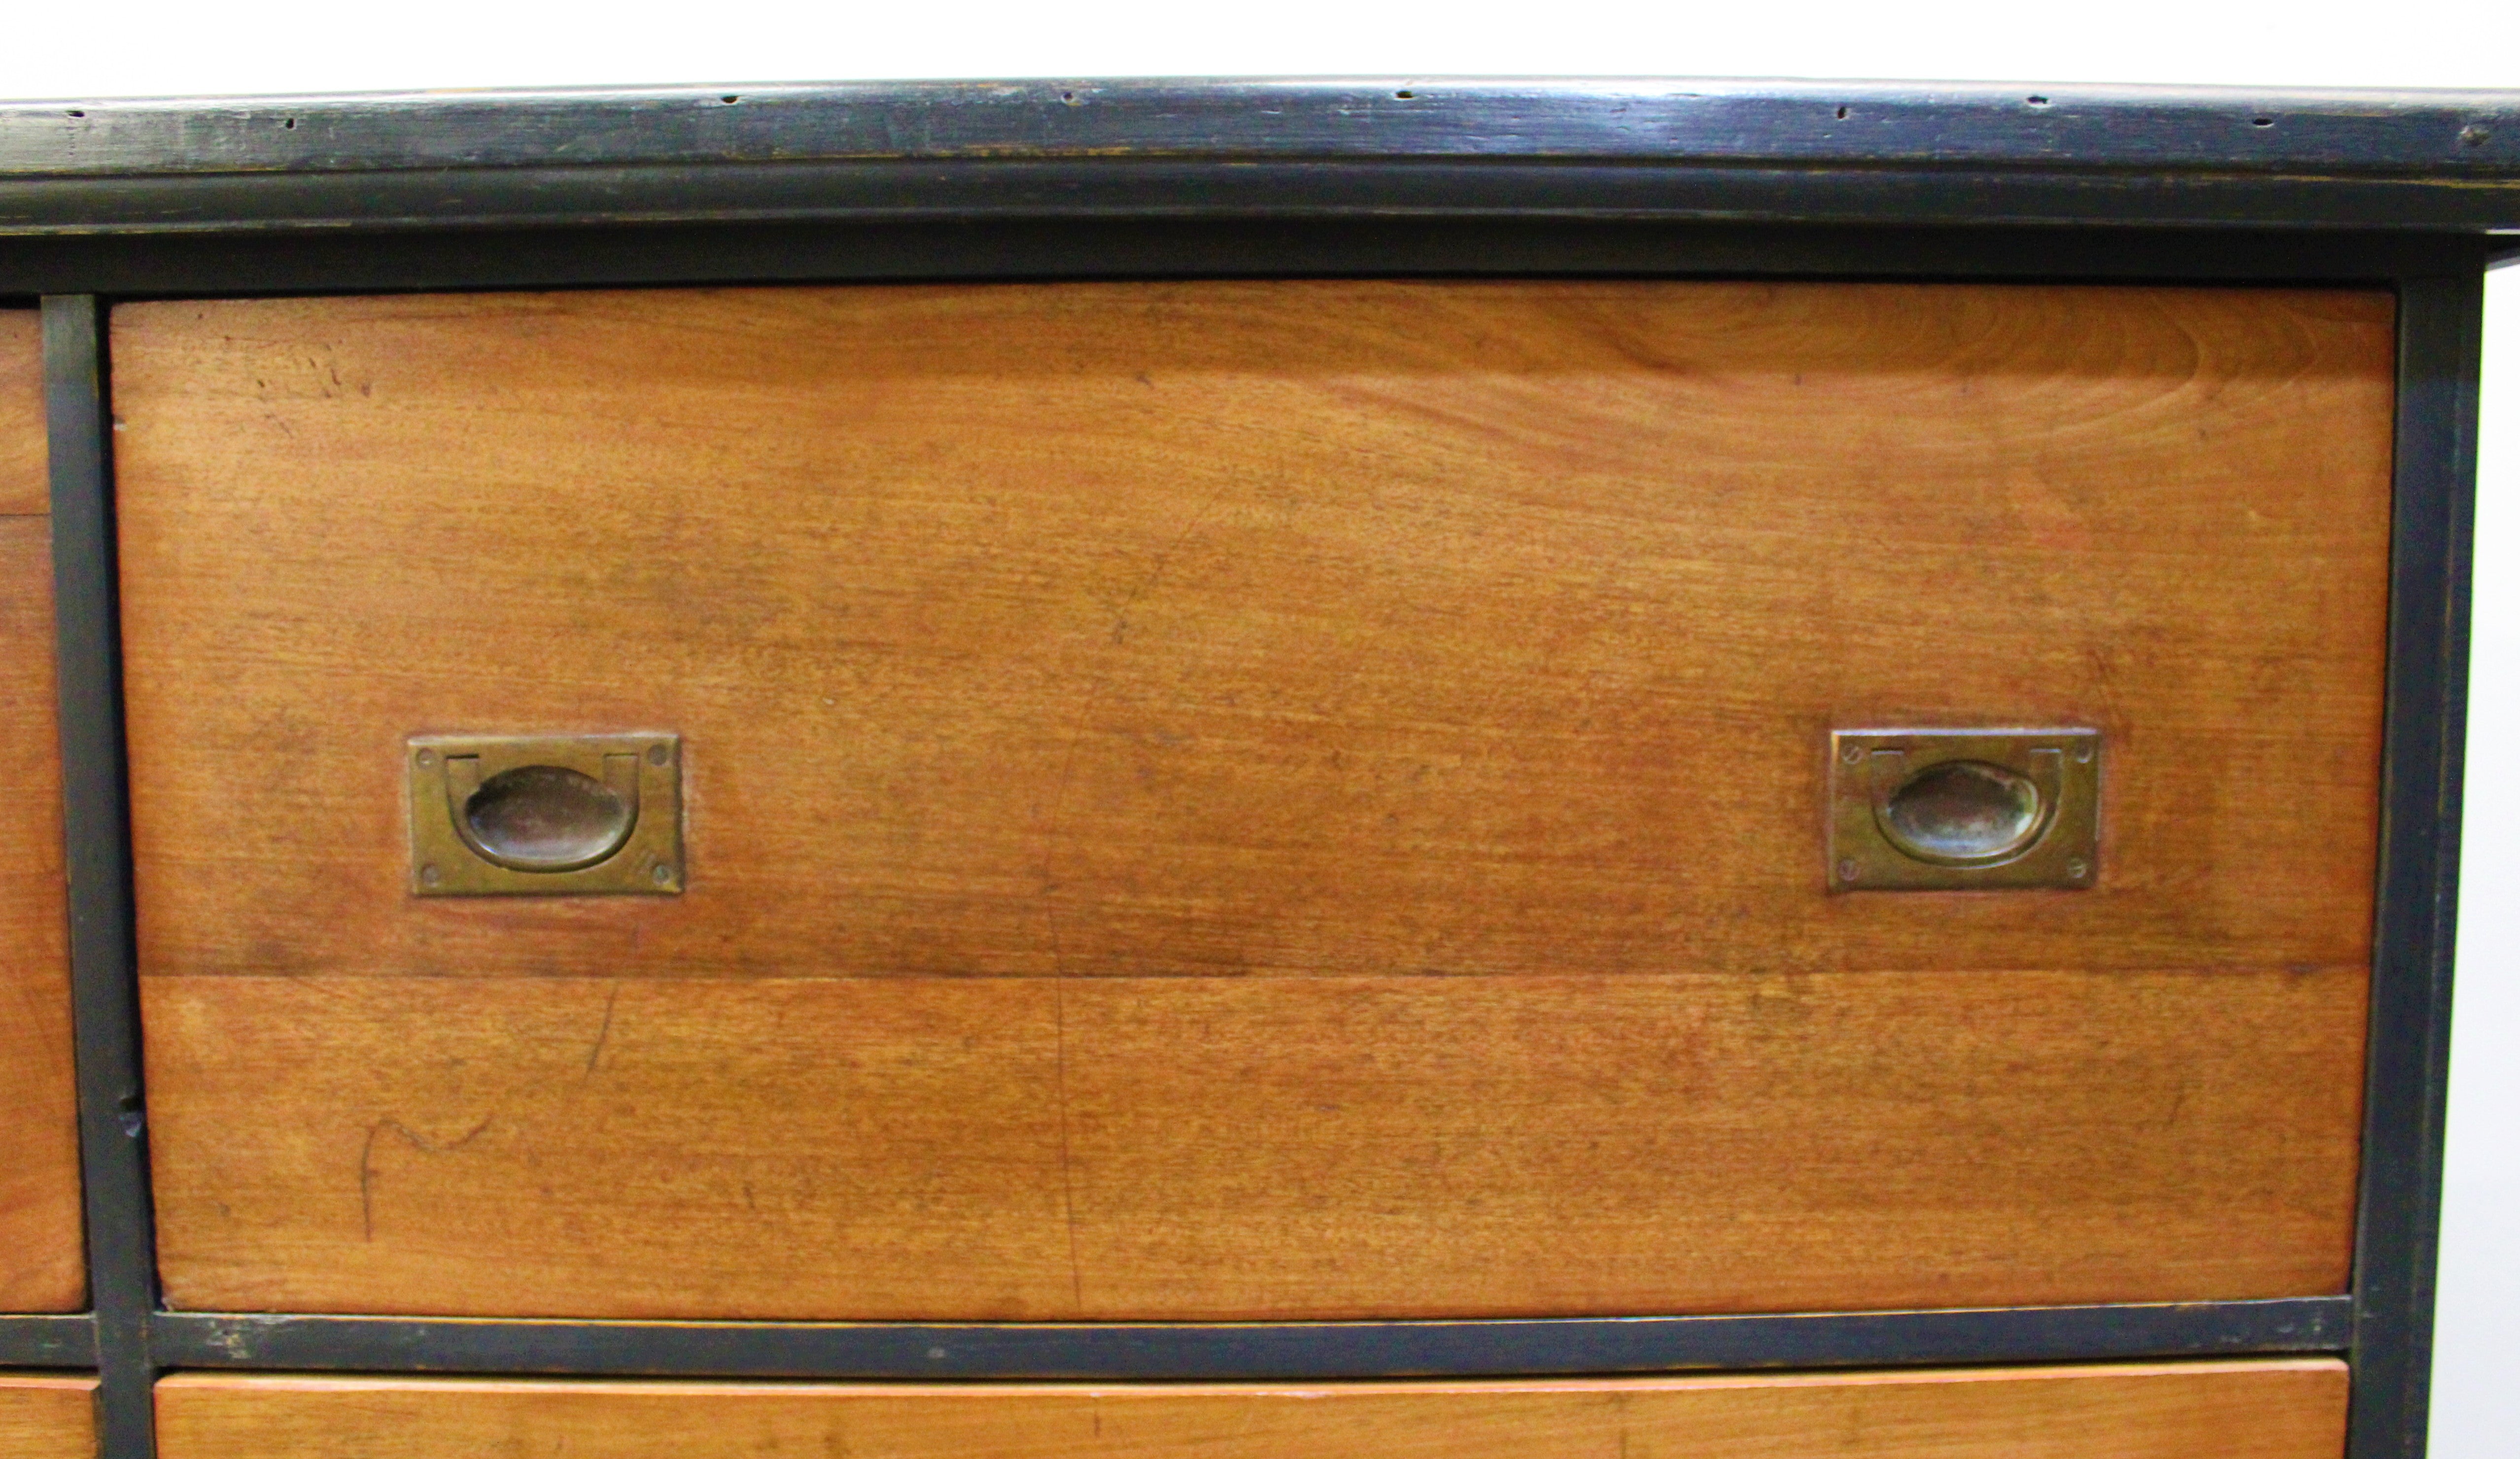 Victorian Drapers Chest